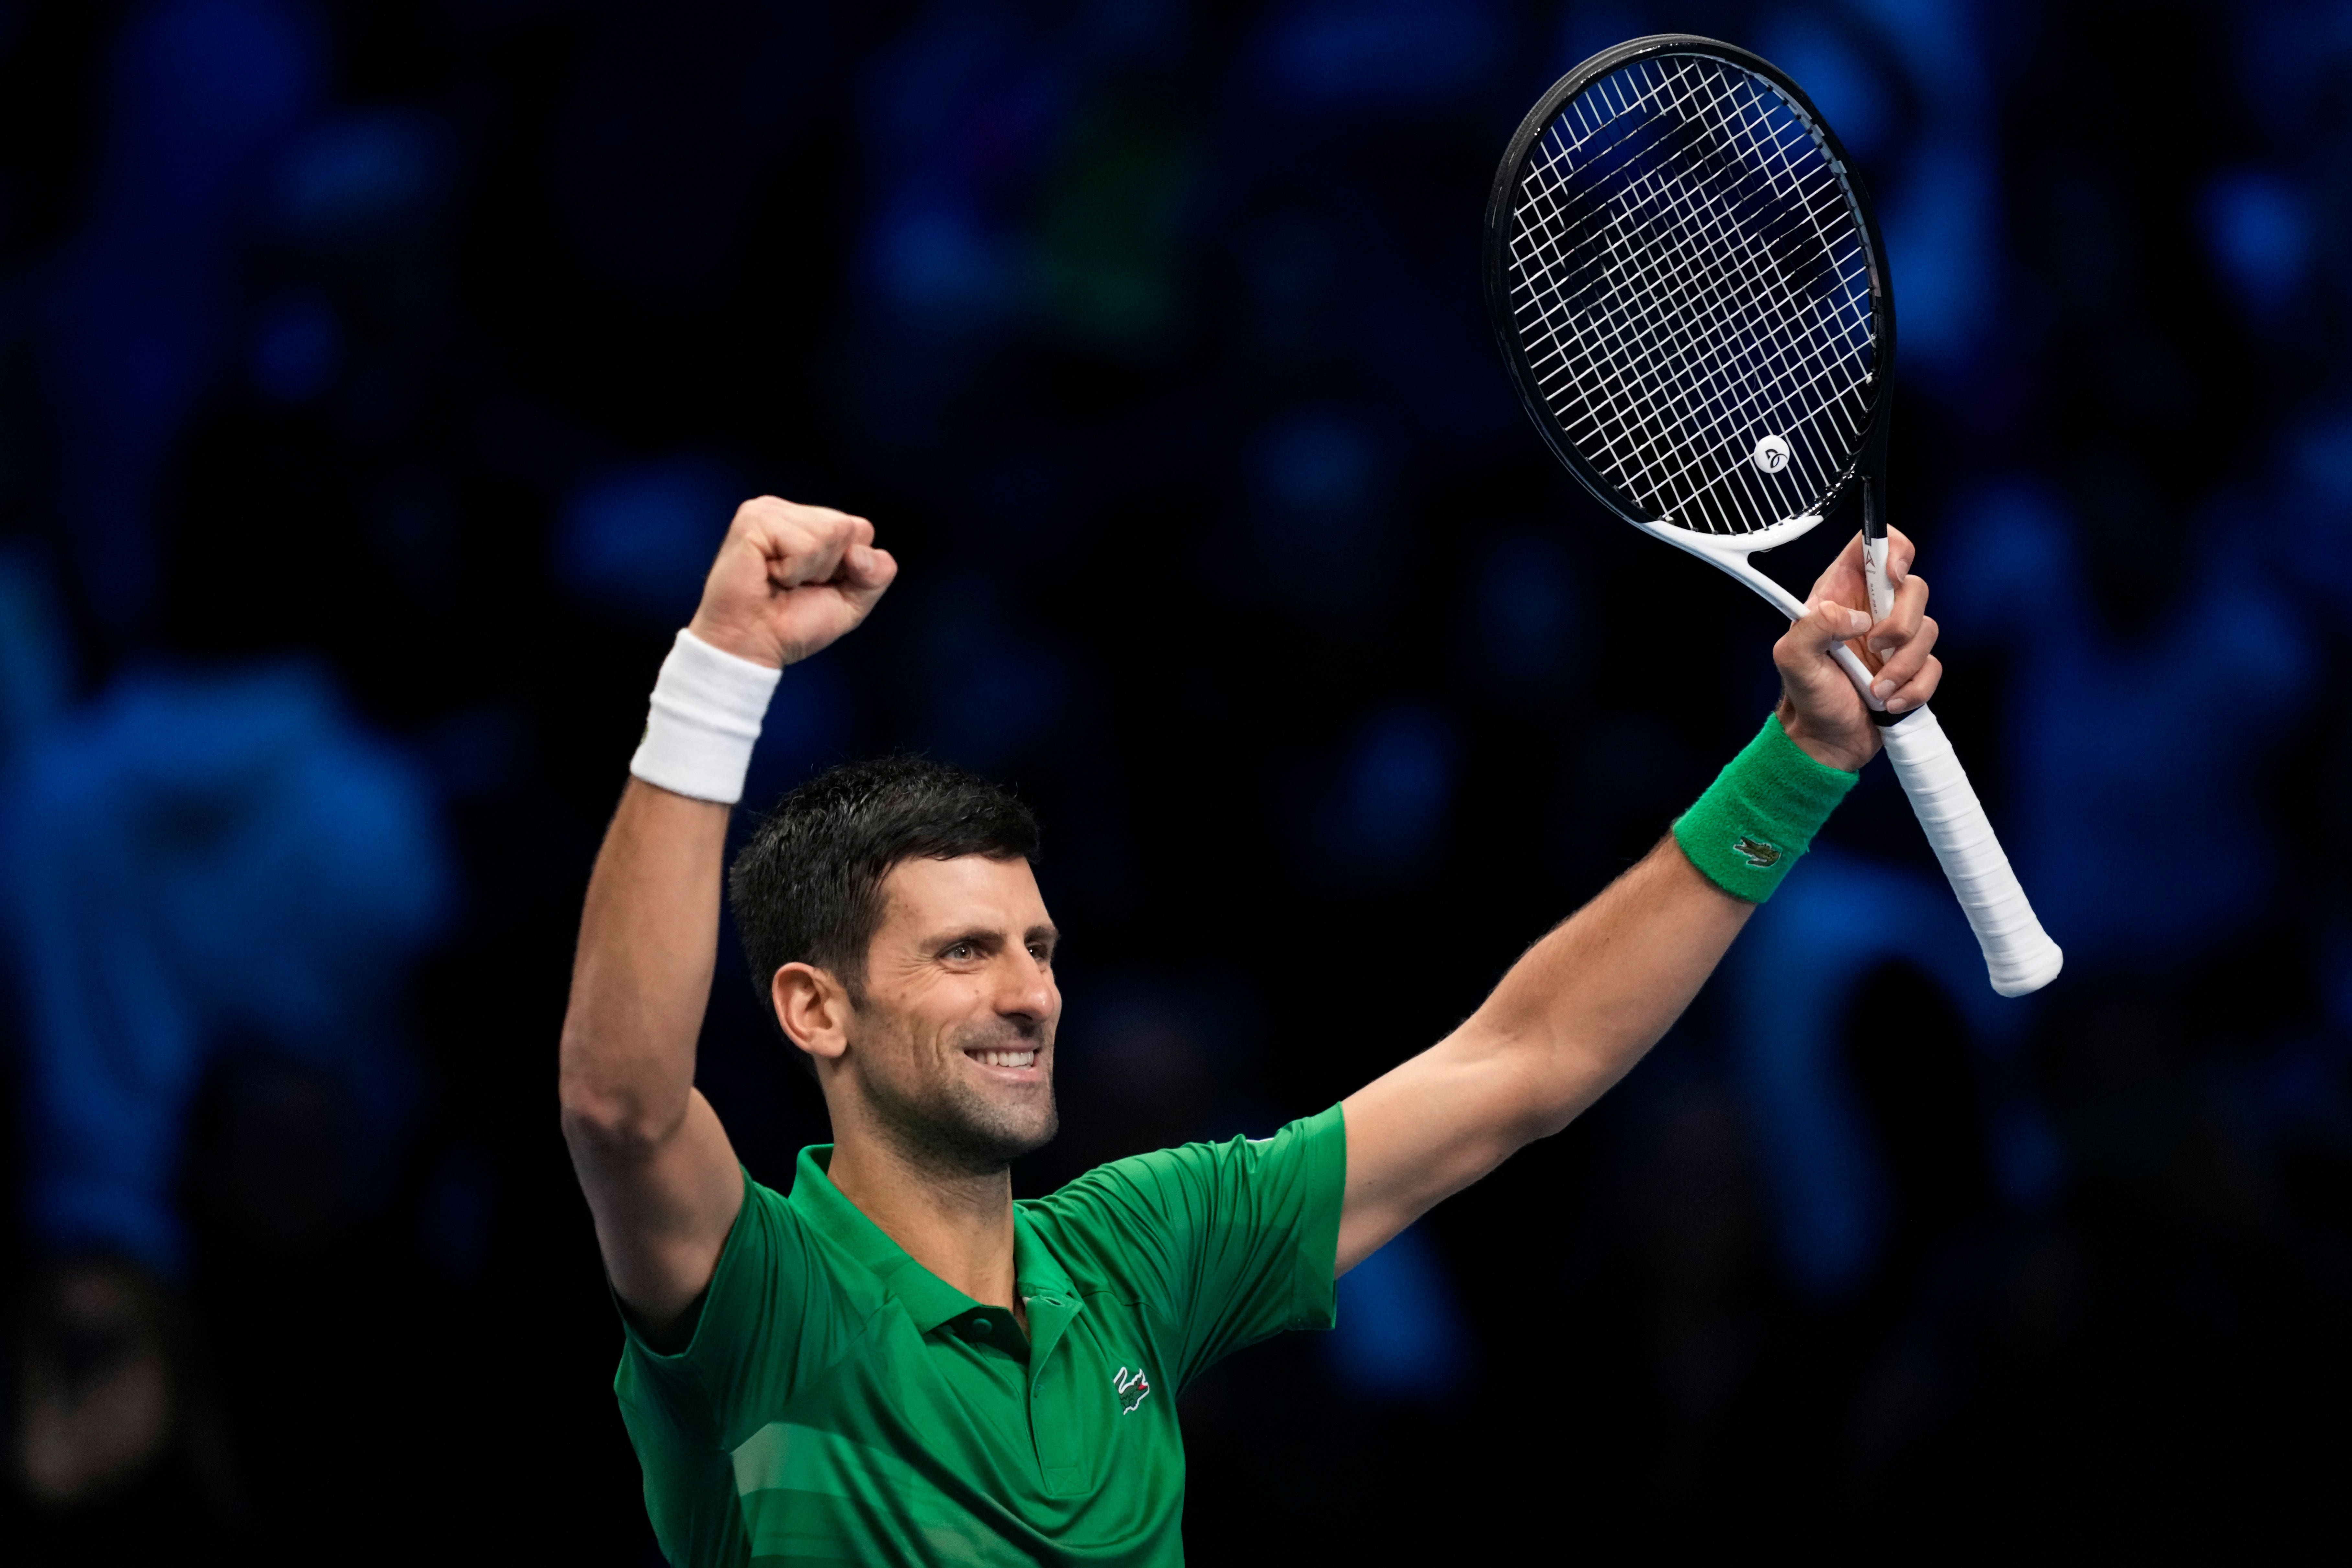 Novak Djokovic closes in on Roger Federer record after reaching ATP Finals final The Independent